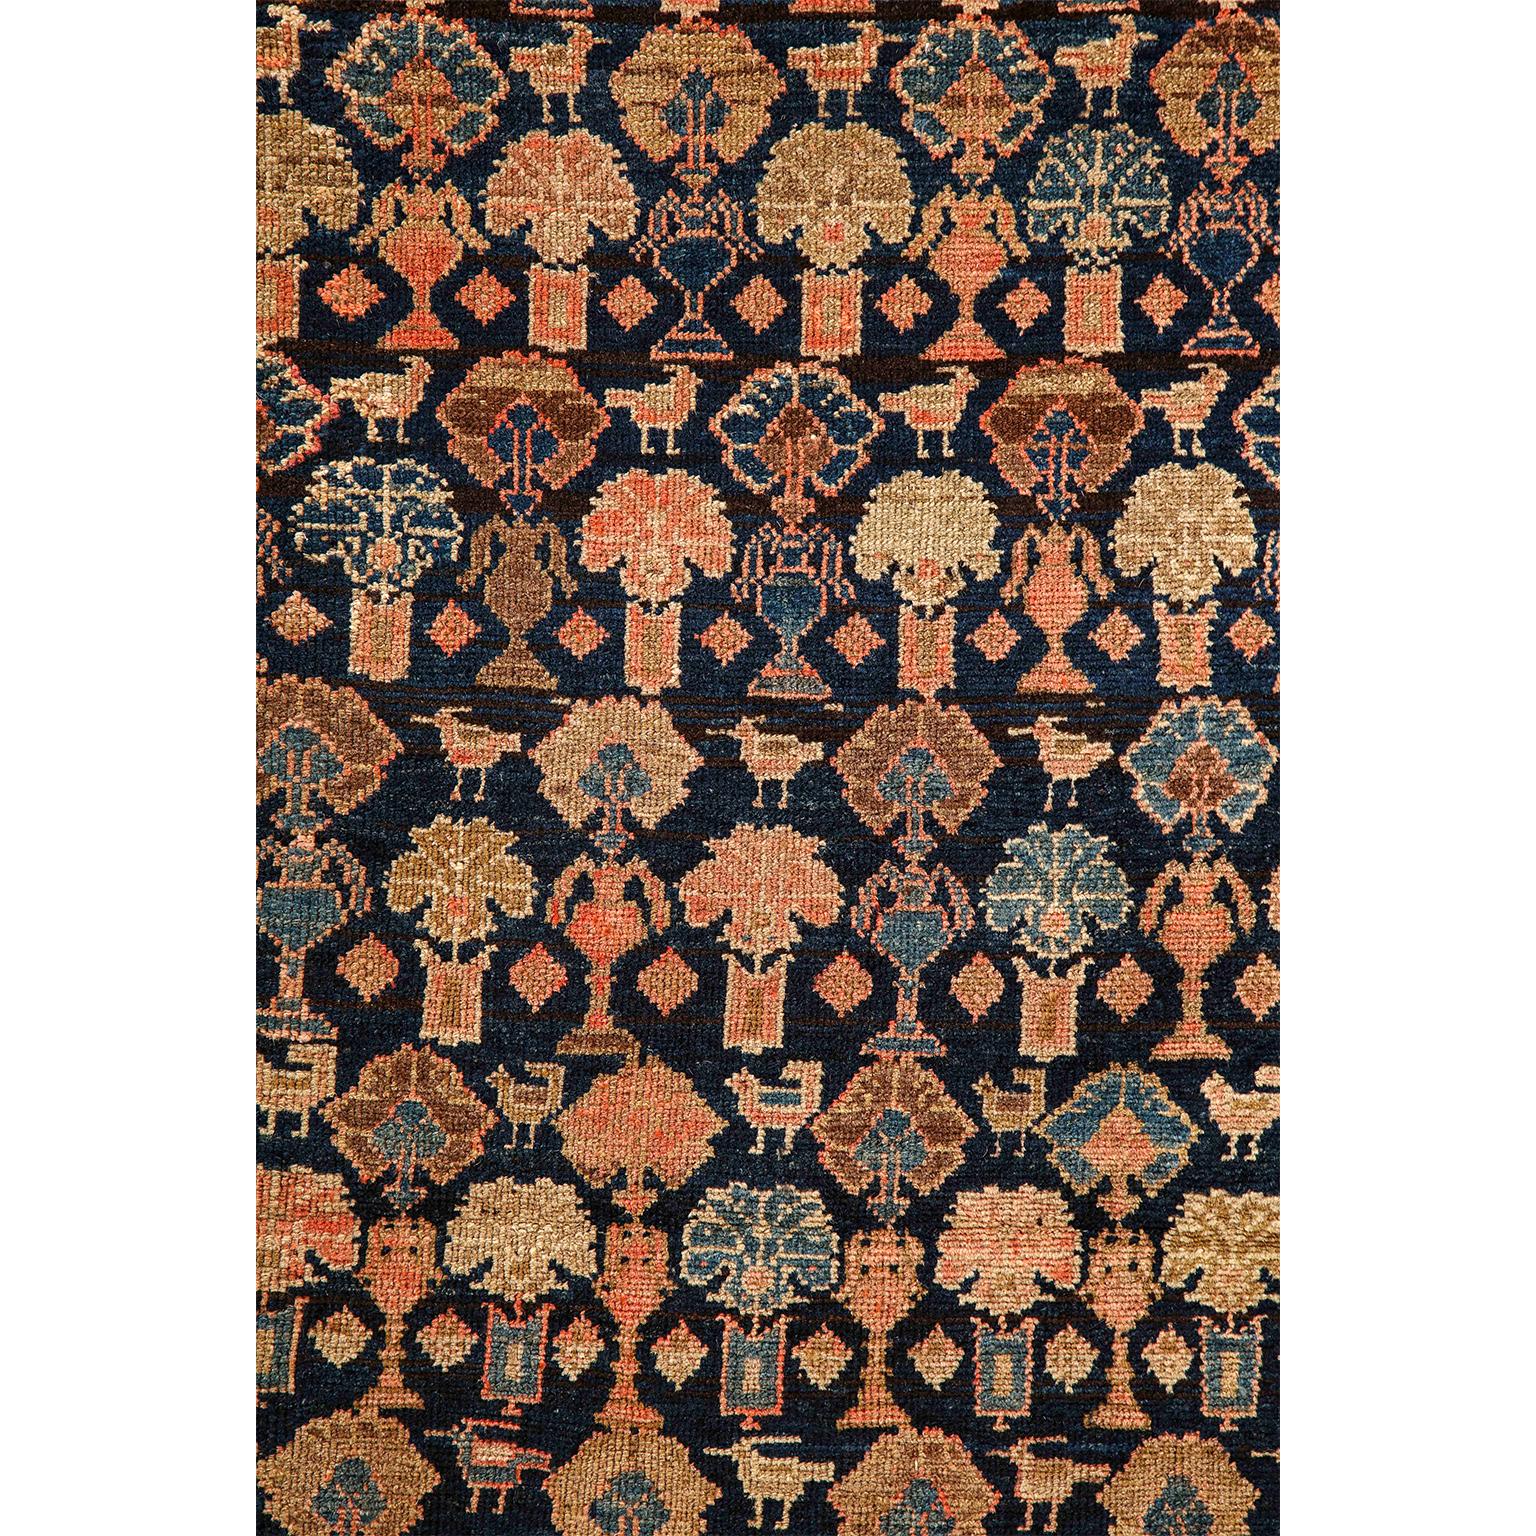 Antique 1900s Persian Malayer Rug, Flower Motifs, Wool, 5' x 7' In Good Condition For Sale In New York, NY